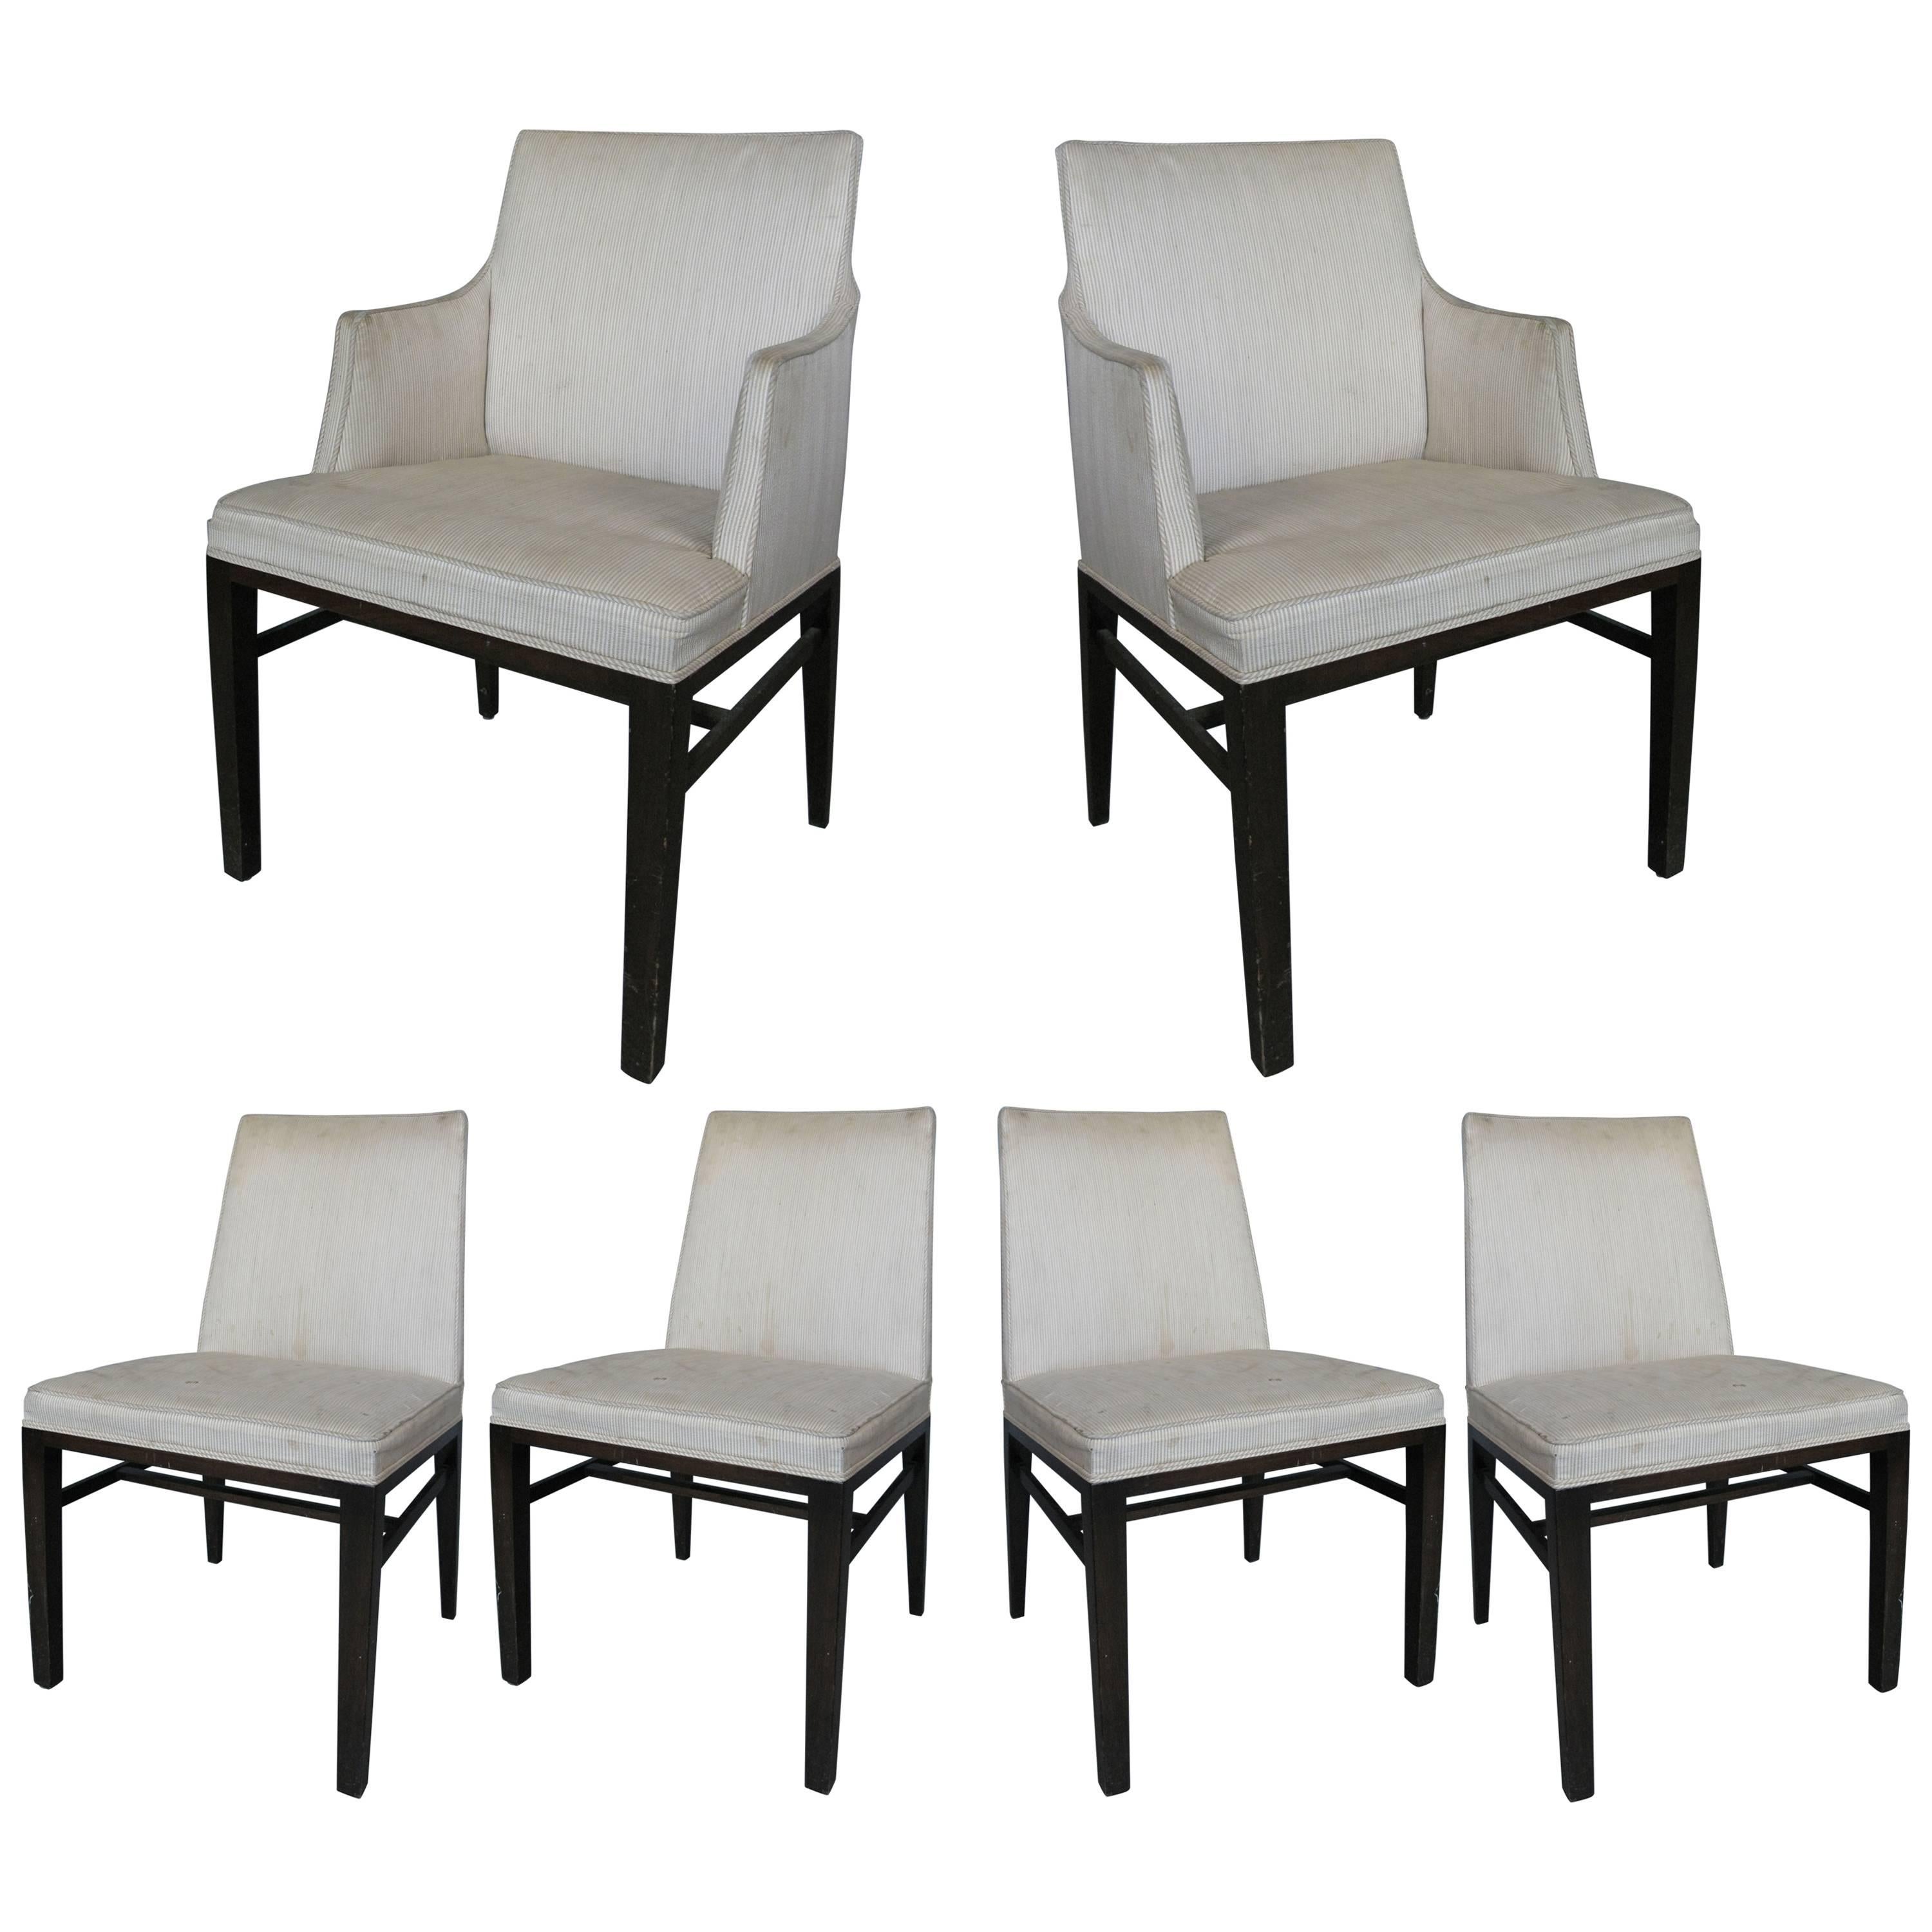 Set of Six Vintage Dining Chairs by Edward Wormley for Dunbar